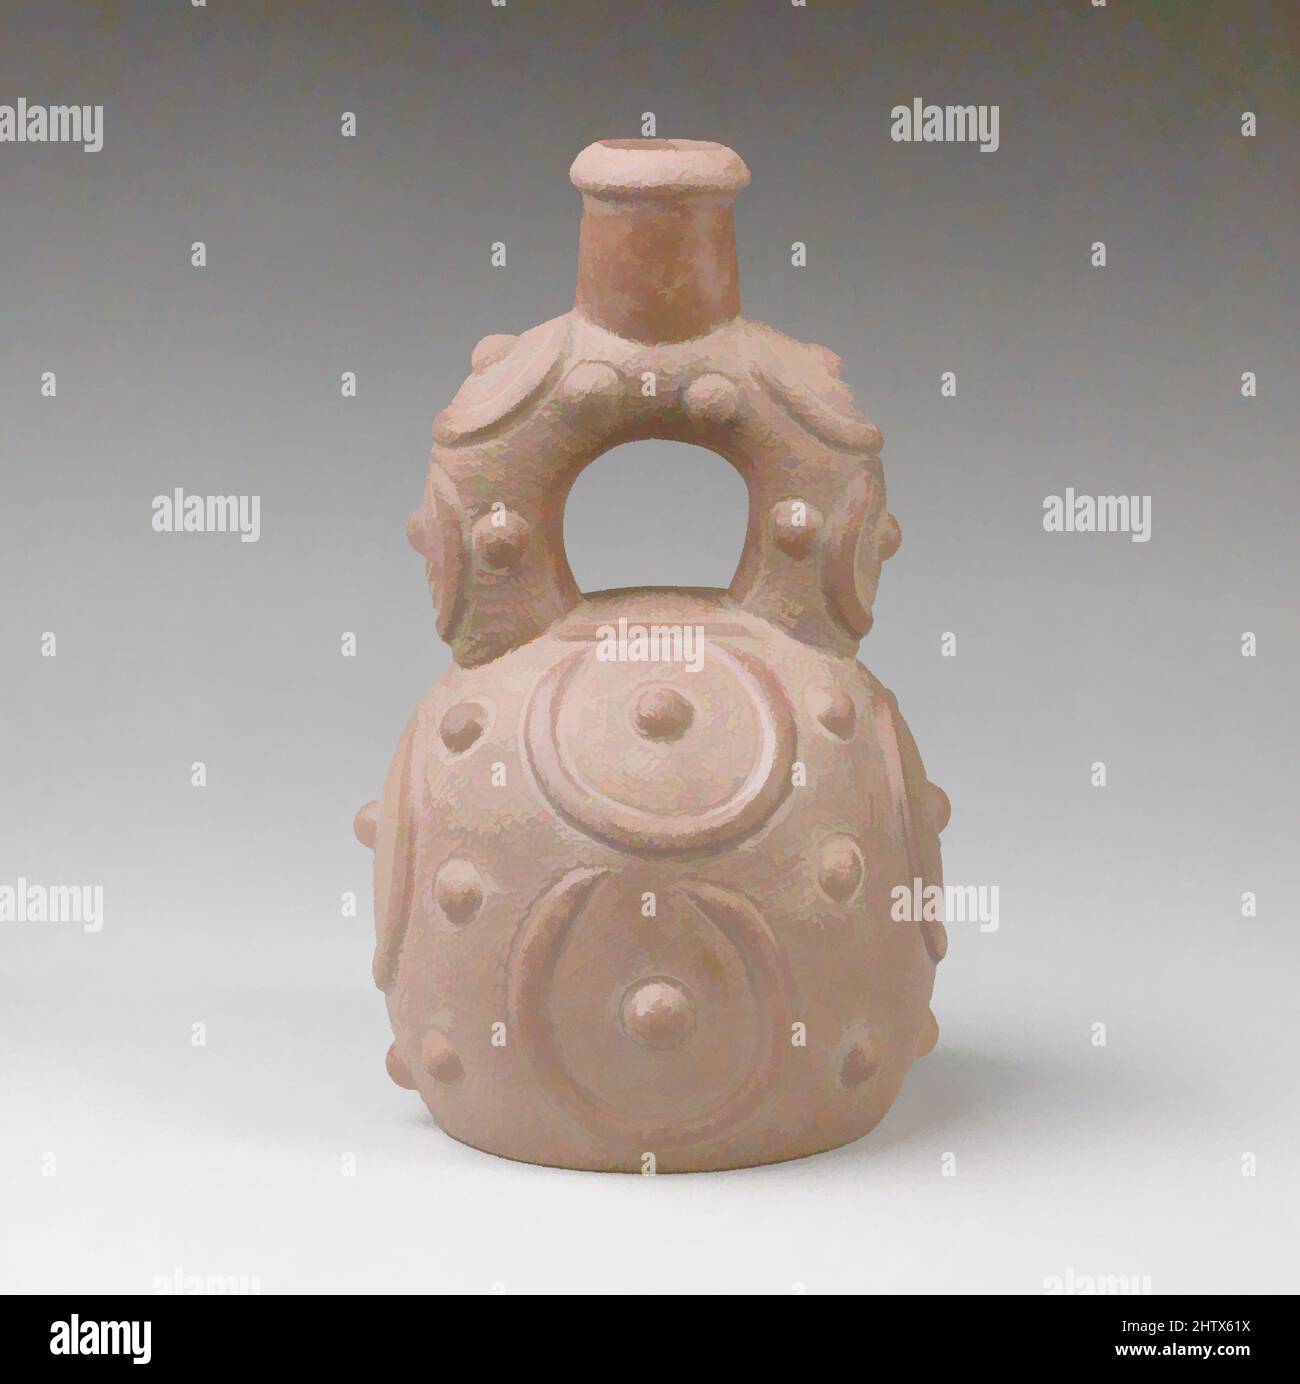 Art inspired by Stirrup-spout Bottle, 12th–5th century B.C., Peru, Cupisnique, Ceramic, Height 8-1/2 in. (21.6 cm), Ceramics-Containers, Bottles made in northern South America beginning in the second millennium B.C. were frequently made in a shape that is visually reminiscent of the, Classic works modernized by Artotop with a splash of modernity. Shapes, color and value, eye-catching visual impact on art. Emotions through freedom of artworks in a contemporary way. A timeless message pursuing a wildly creative new direction. Artists turning to the digital medium and creating the Artotop NFT Stock Photo